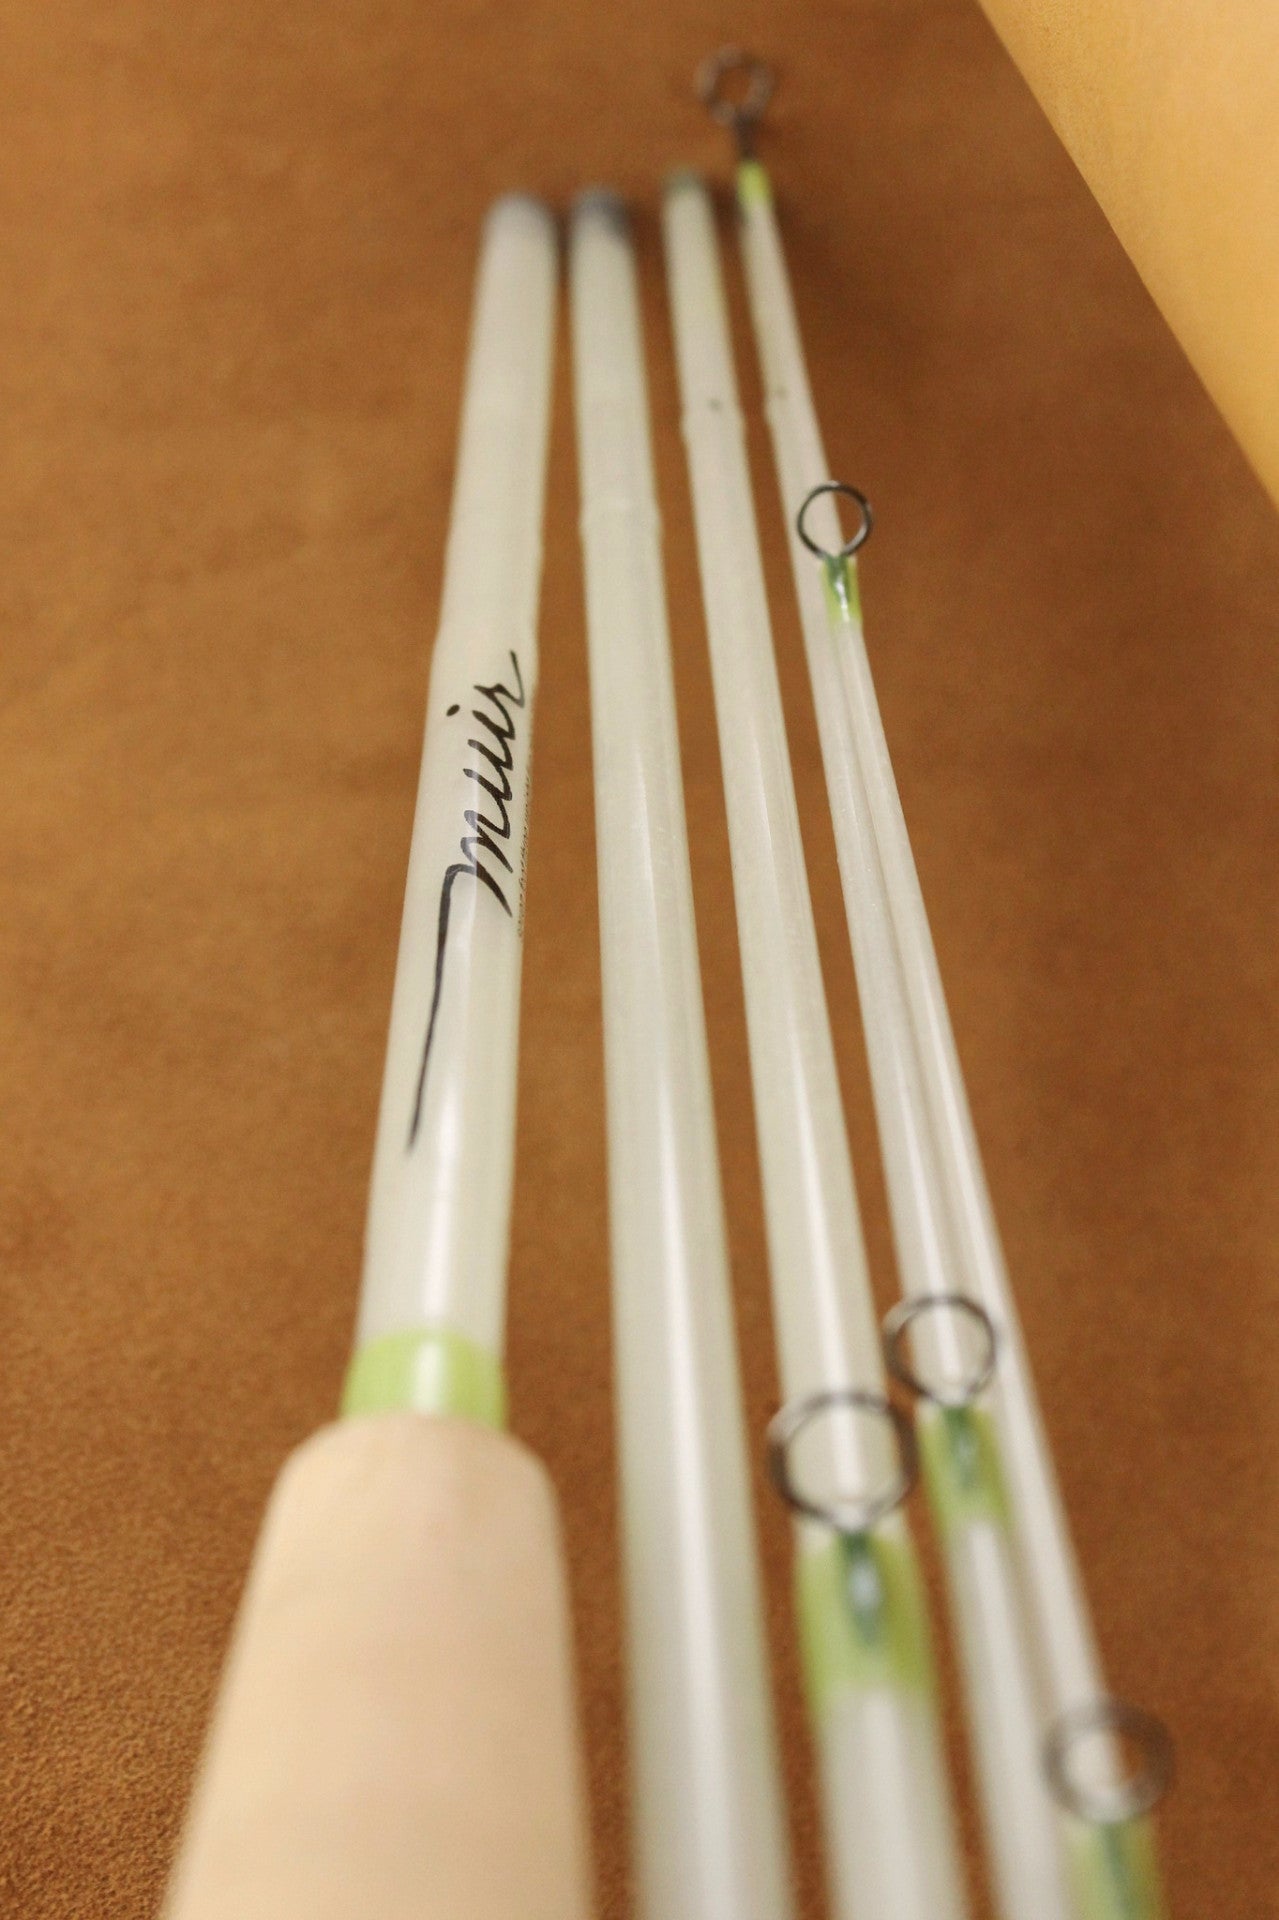 MUIR BLANK 7 foot 3 weight 5 piece glass... fiberglass rod blank with bag, case and decals